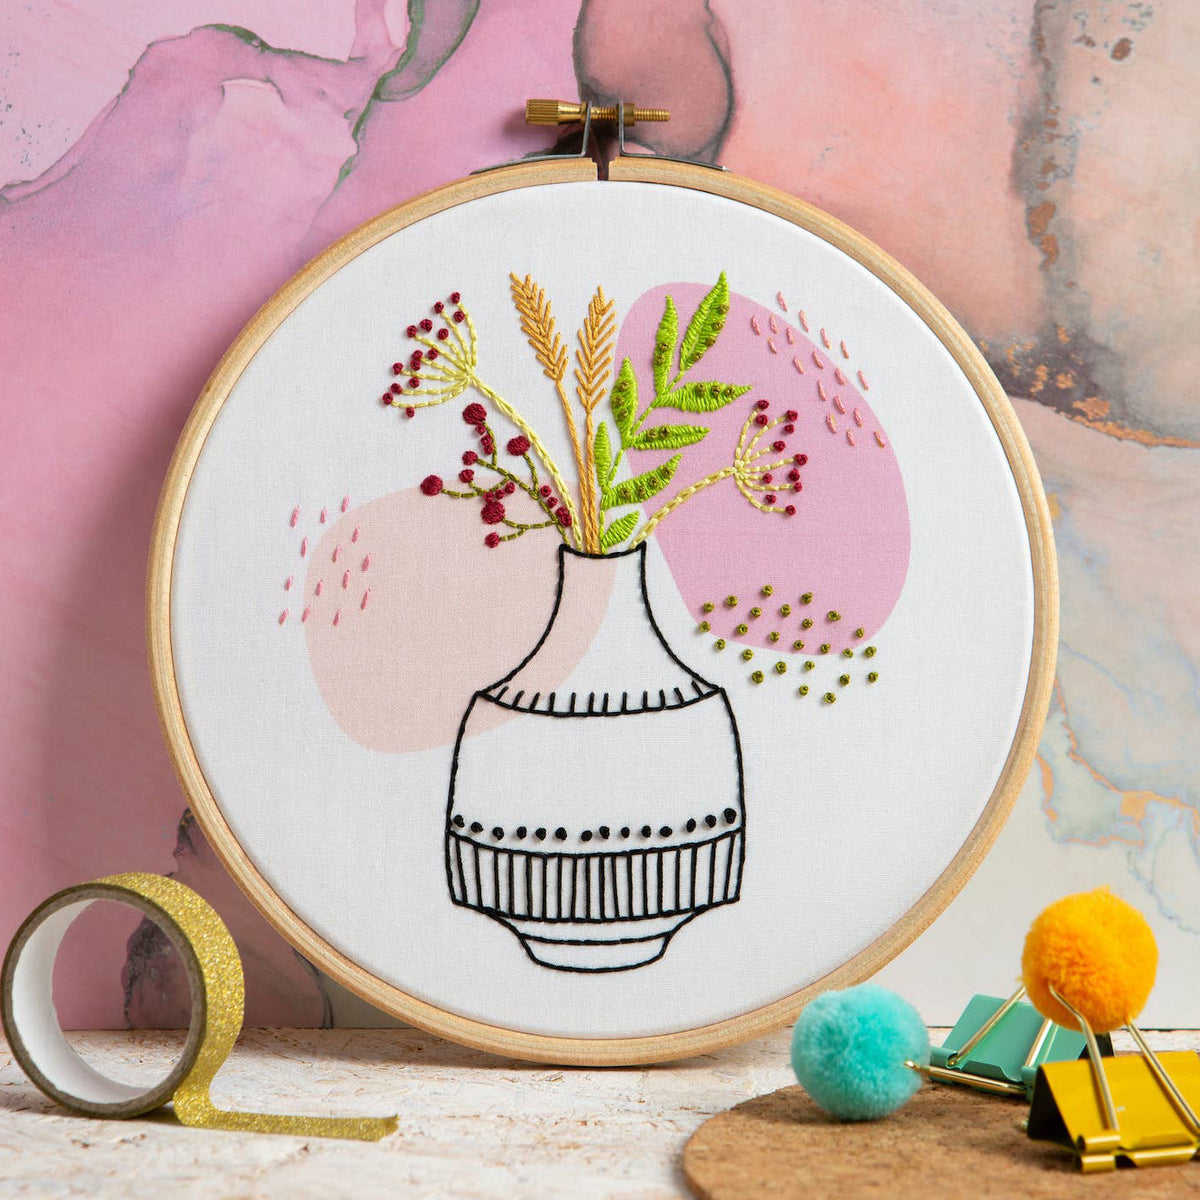 Meadow Stroll Hand Embroidery Kit